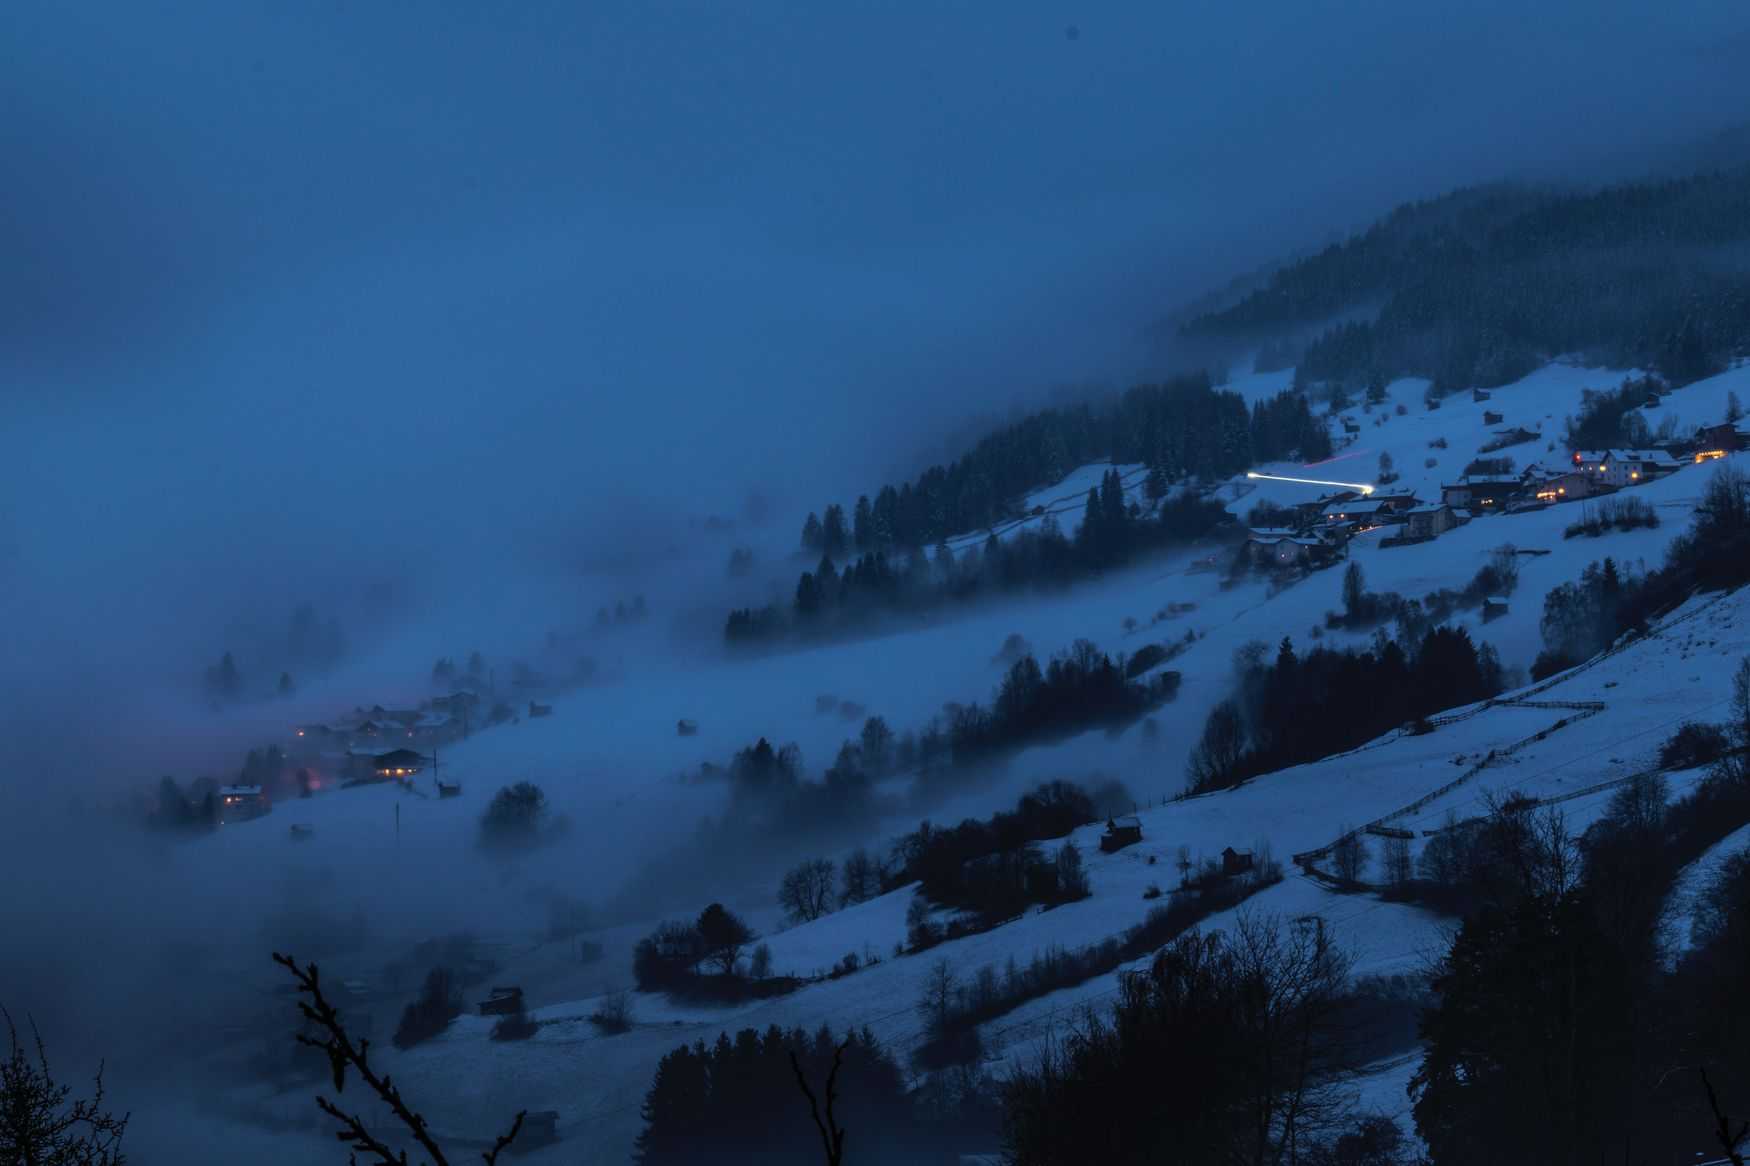 Christmas Eve in Pitztal, at Dusk